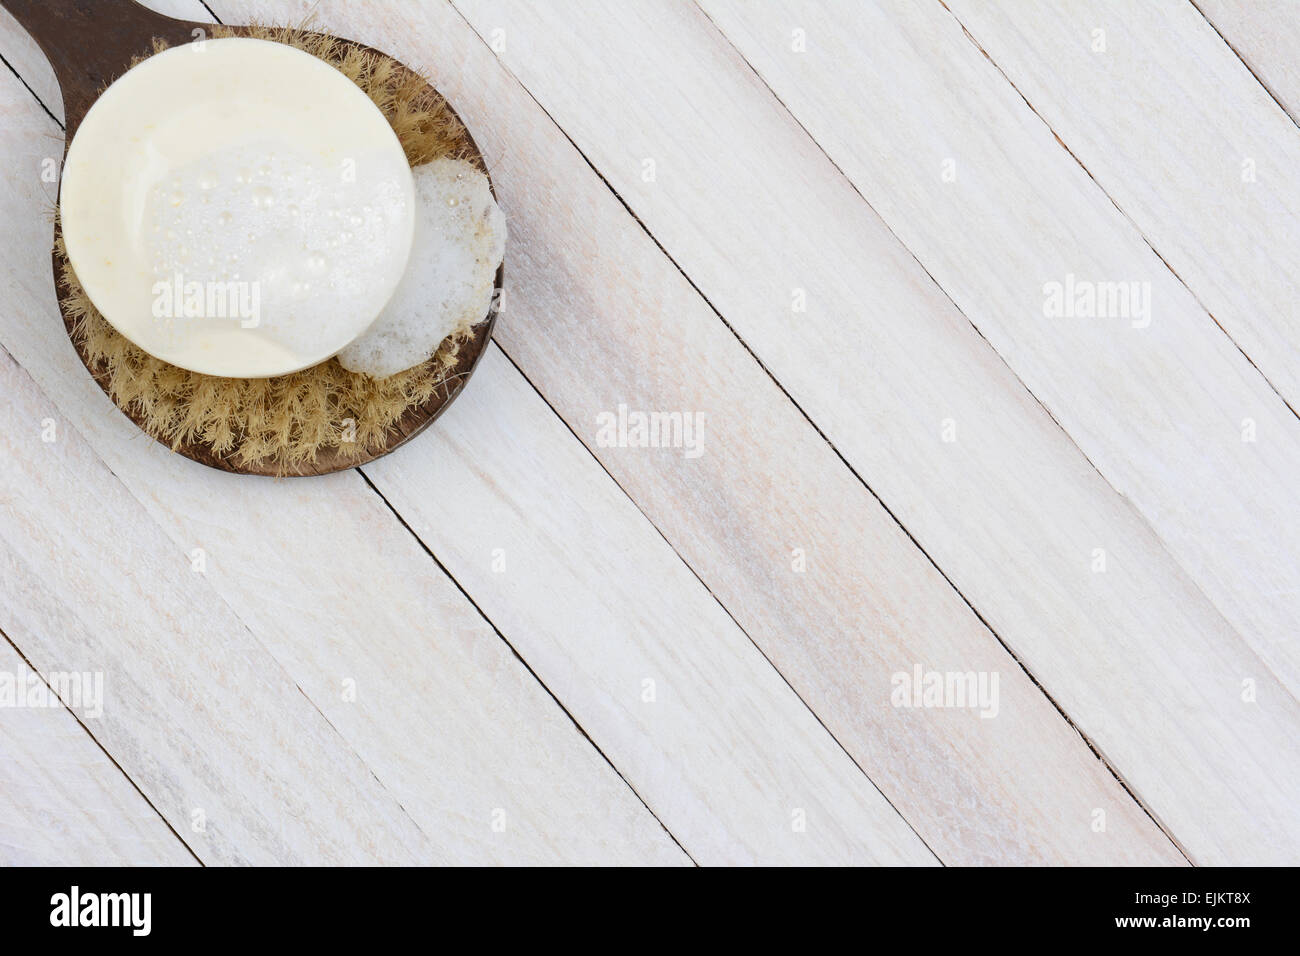 High angle shot of a sudsy bar of soap on a scrub brush. On a rustic wood surface the brush and soap are in the upper left corne Stock Photo